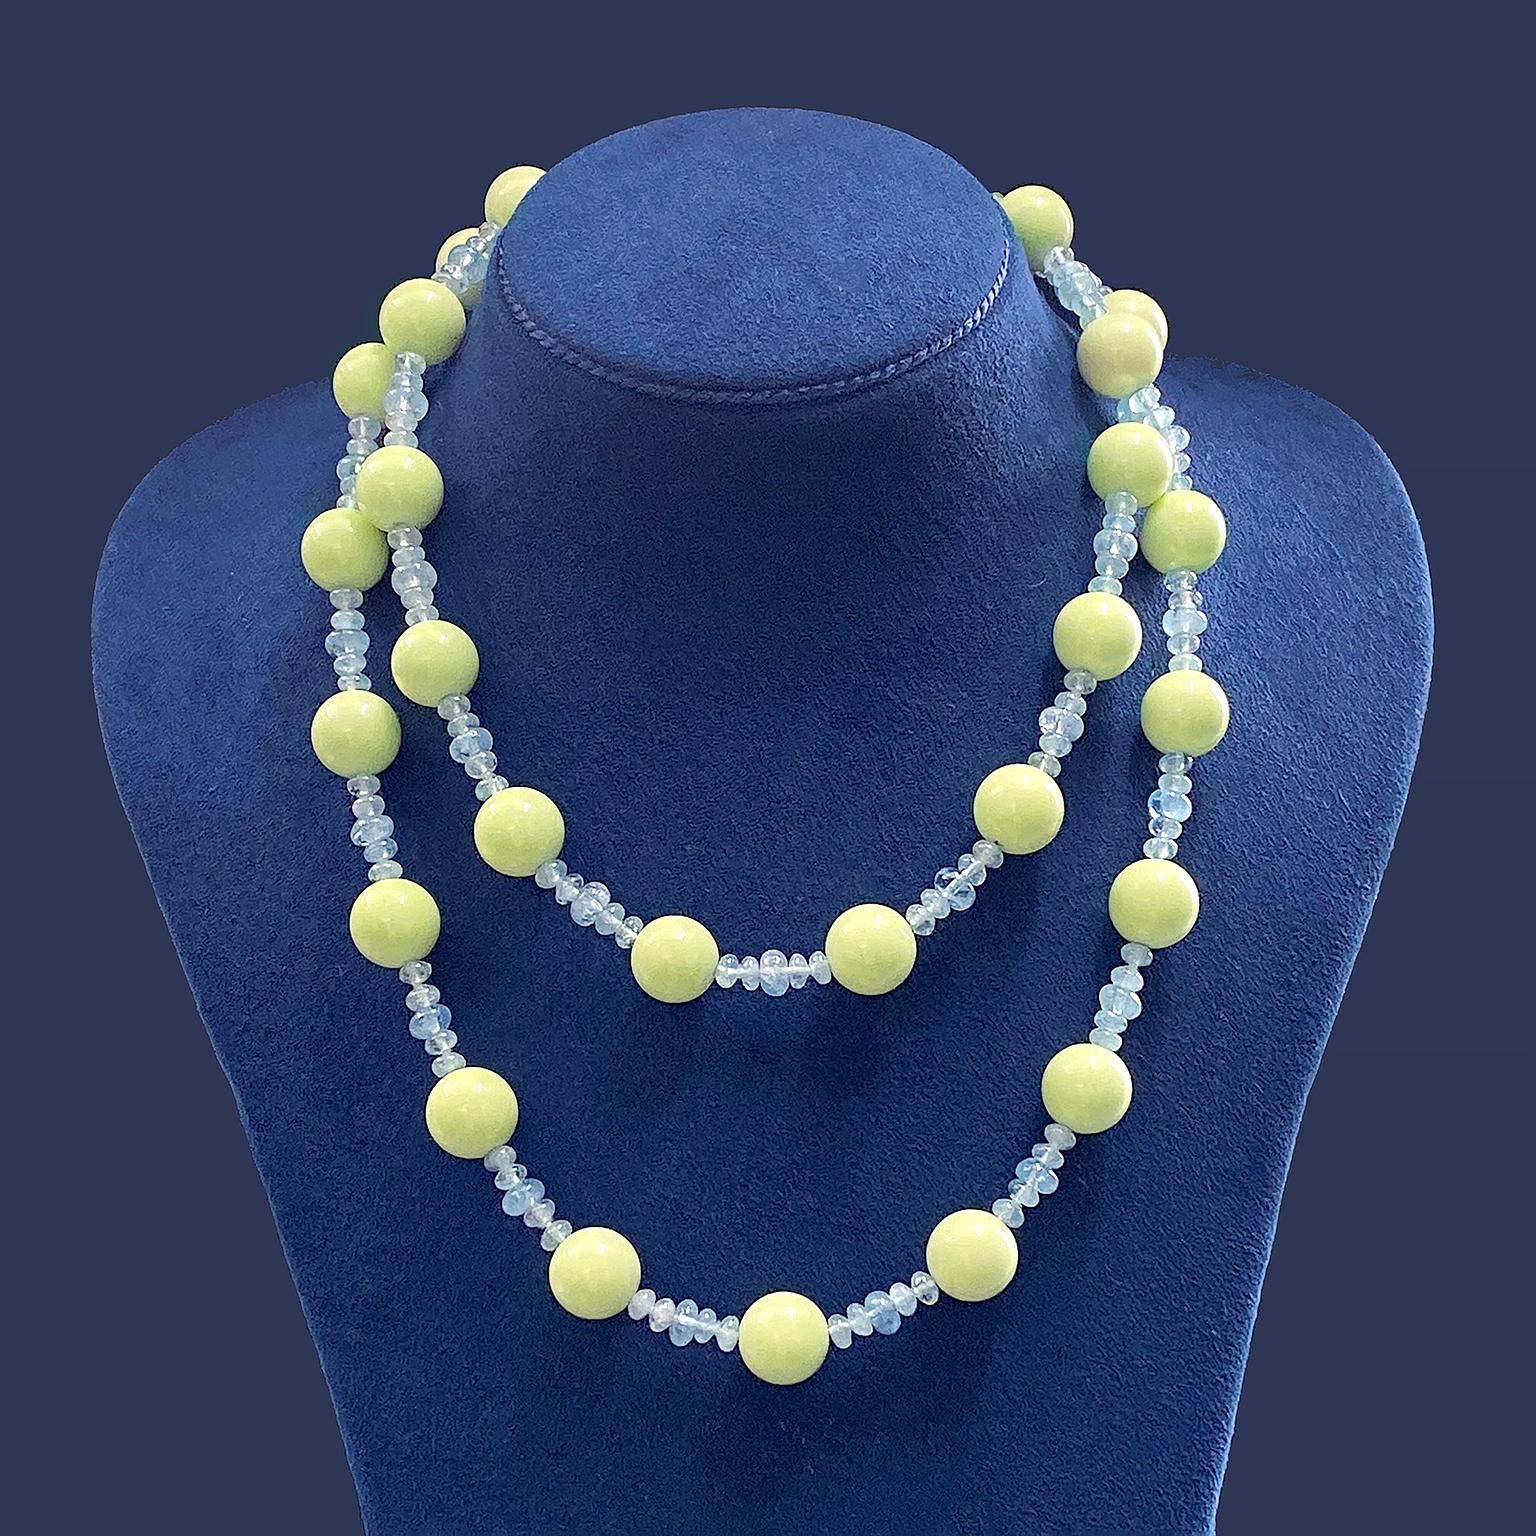 Exquisite mid-tone green in chrysoprase is highlighted in this necklace. Globes of the gem rotate throughout, while five aquamarines accent in between each gem. Rondelles of aquamarine vary, creating an arrangement of two pairs on each side of a